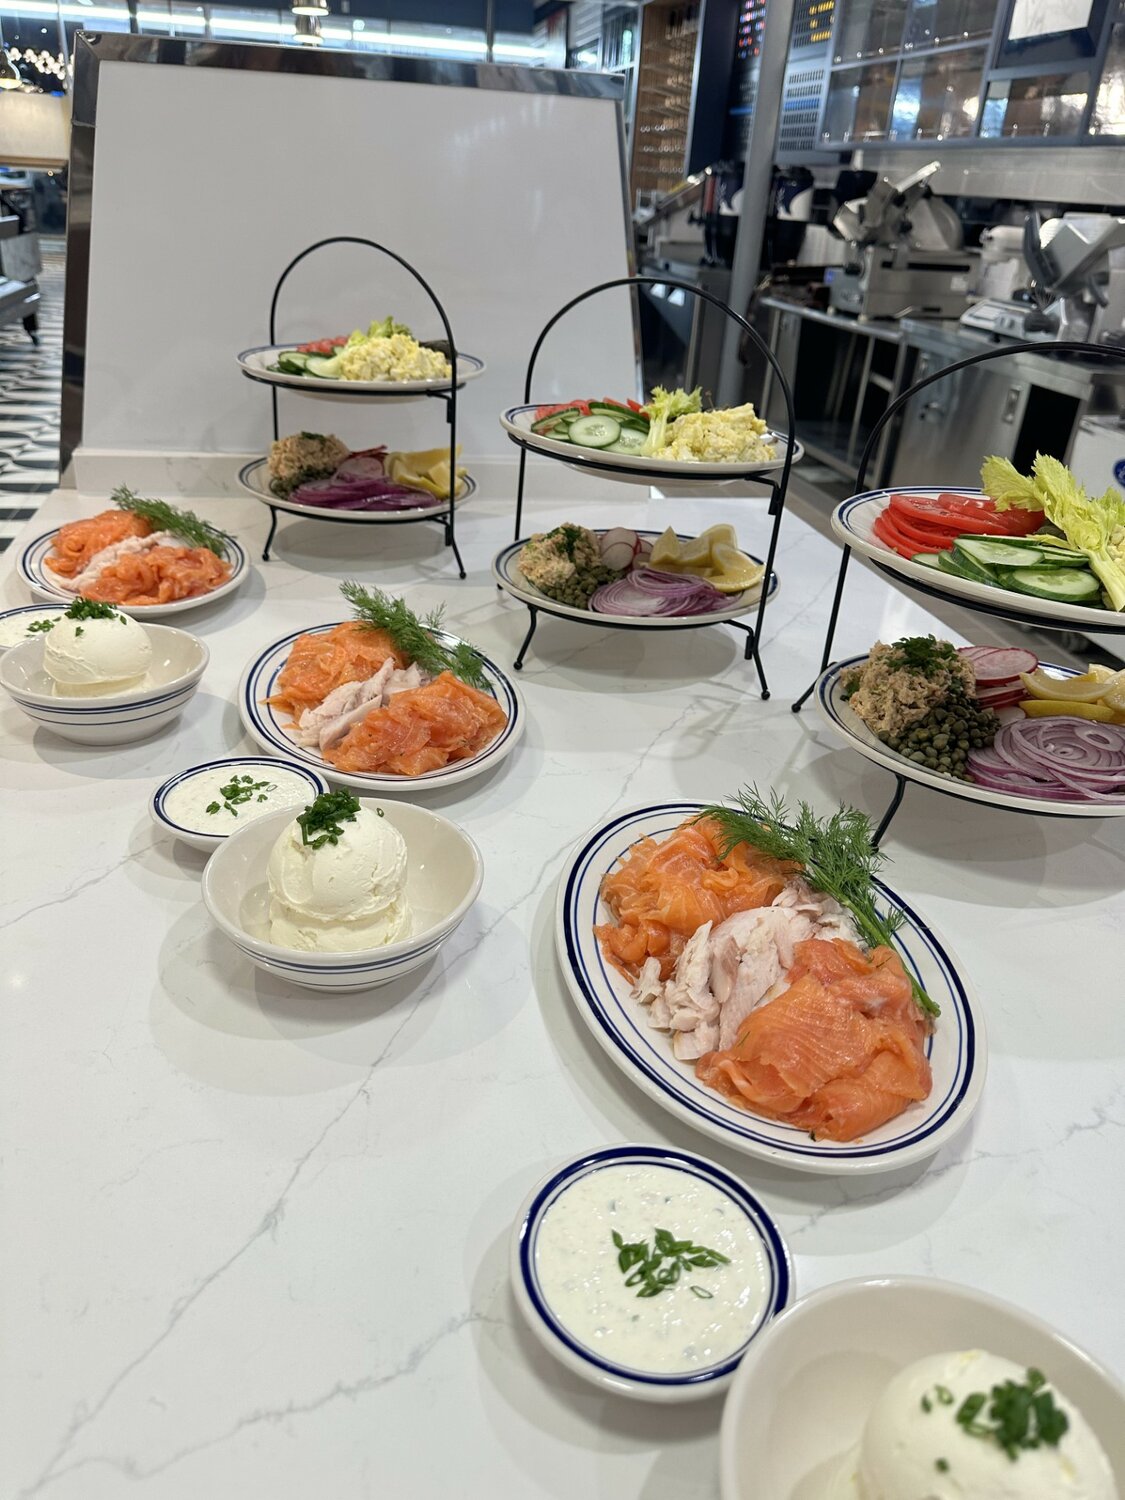 Platters of lox and whitefish with all the accompaniments.